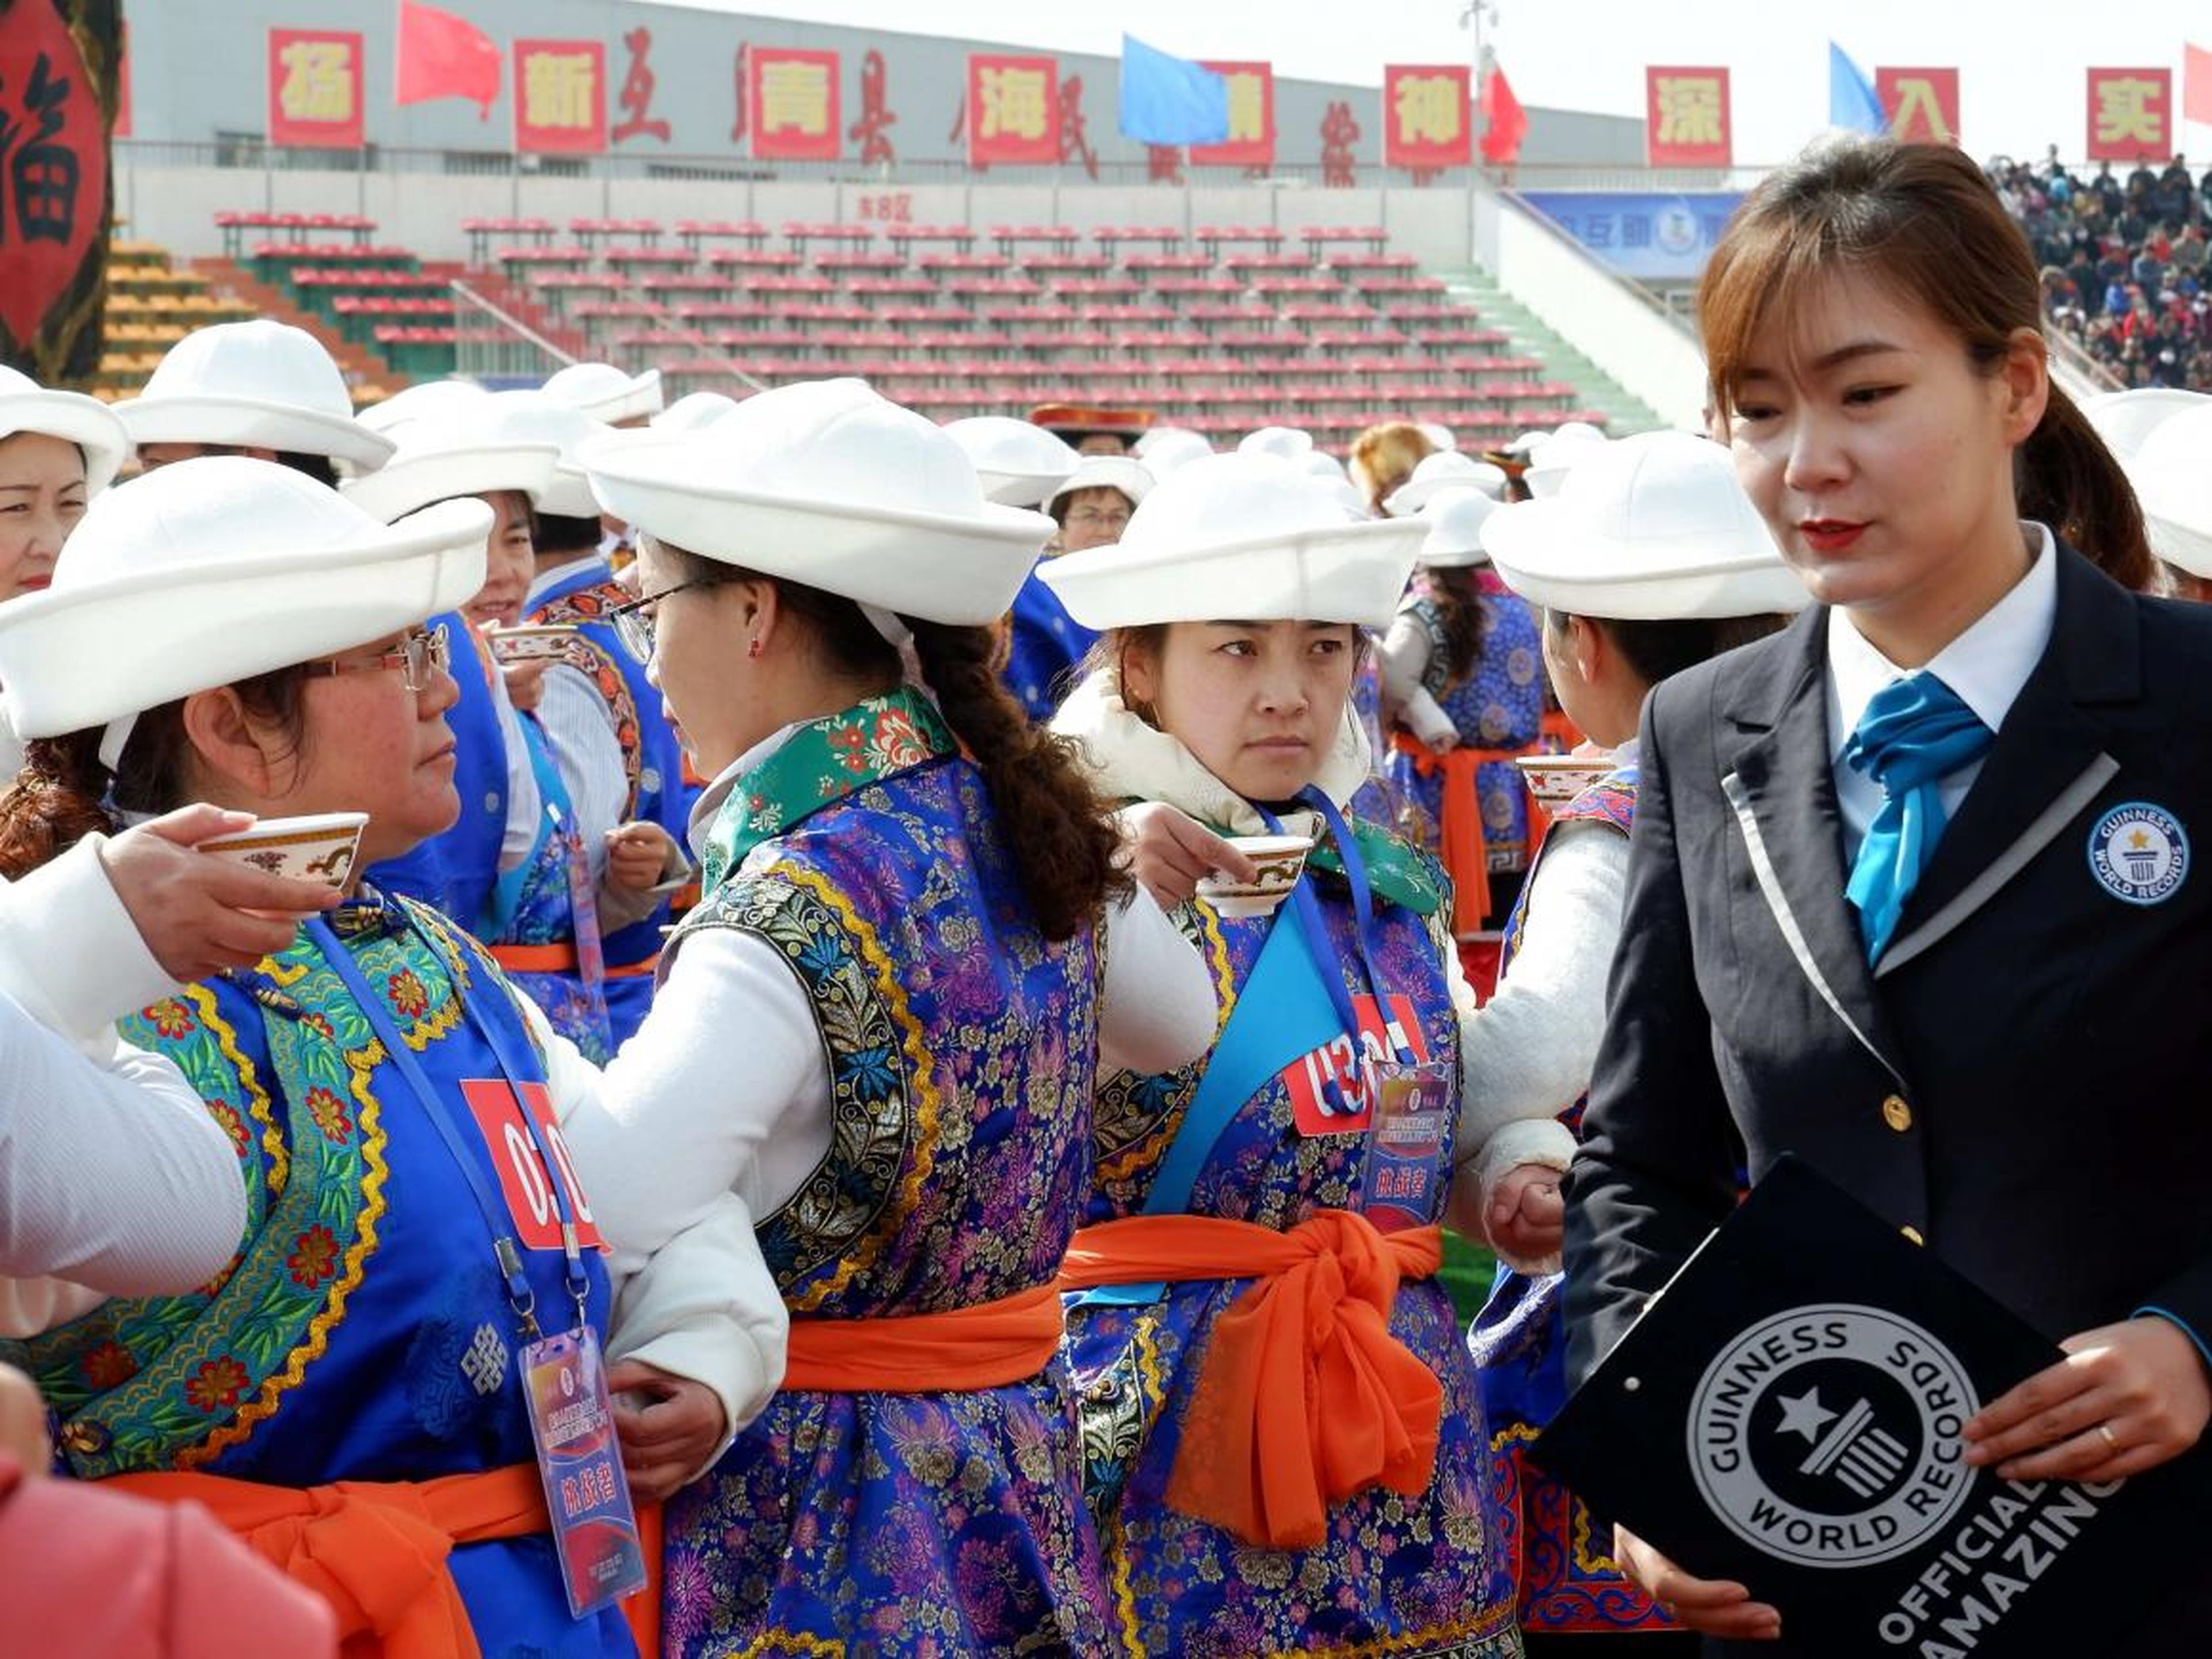 A Guinness World Records adjudicator at the wine-toasting event in Haidong, Qinghai, China.